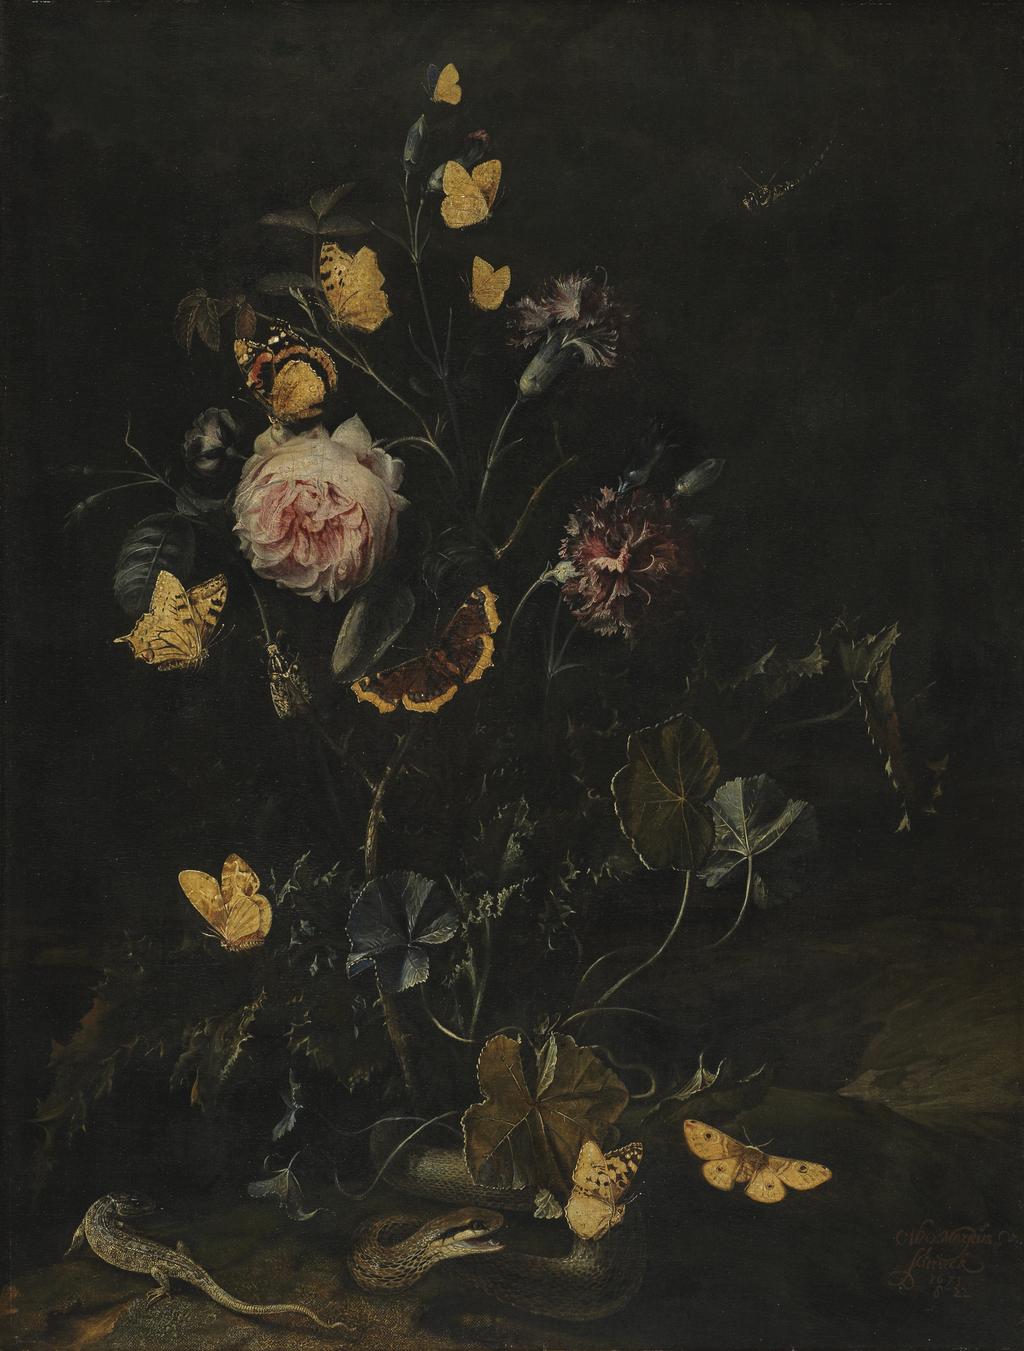 An image of Flowers, insects and reptiles. Marseus van Schrieck, Otto (Dutch, c.1619-1678). Oil on canvas, height 69.5 cm, width 52.7 cm, 1673.